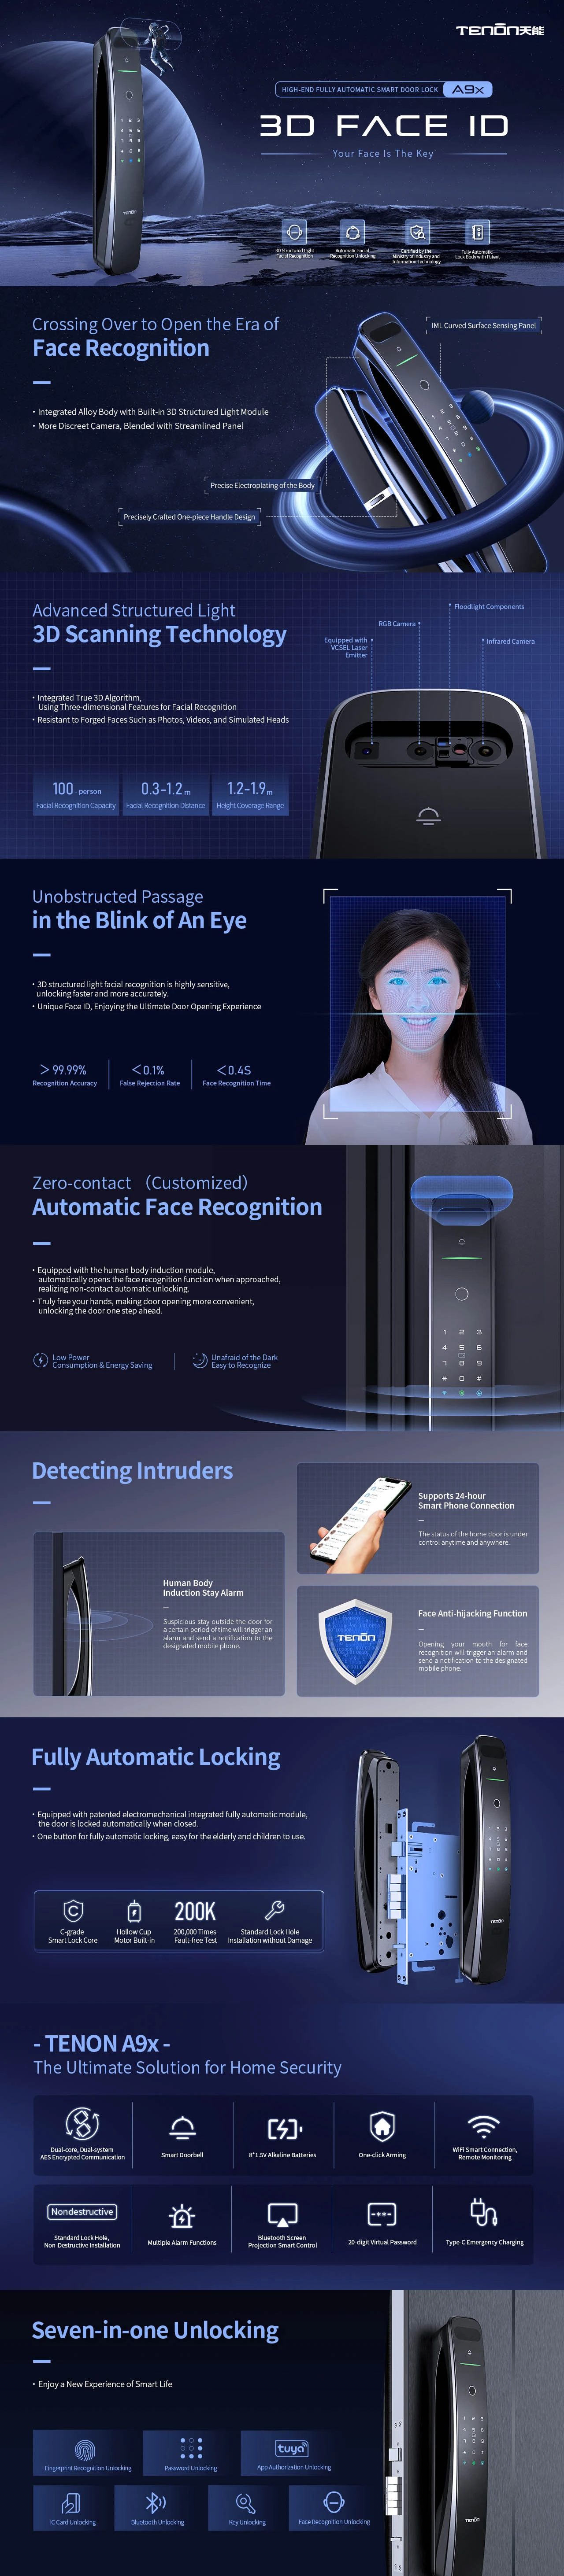 Details of Automatic Face Recognition Smart Lock